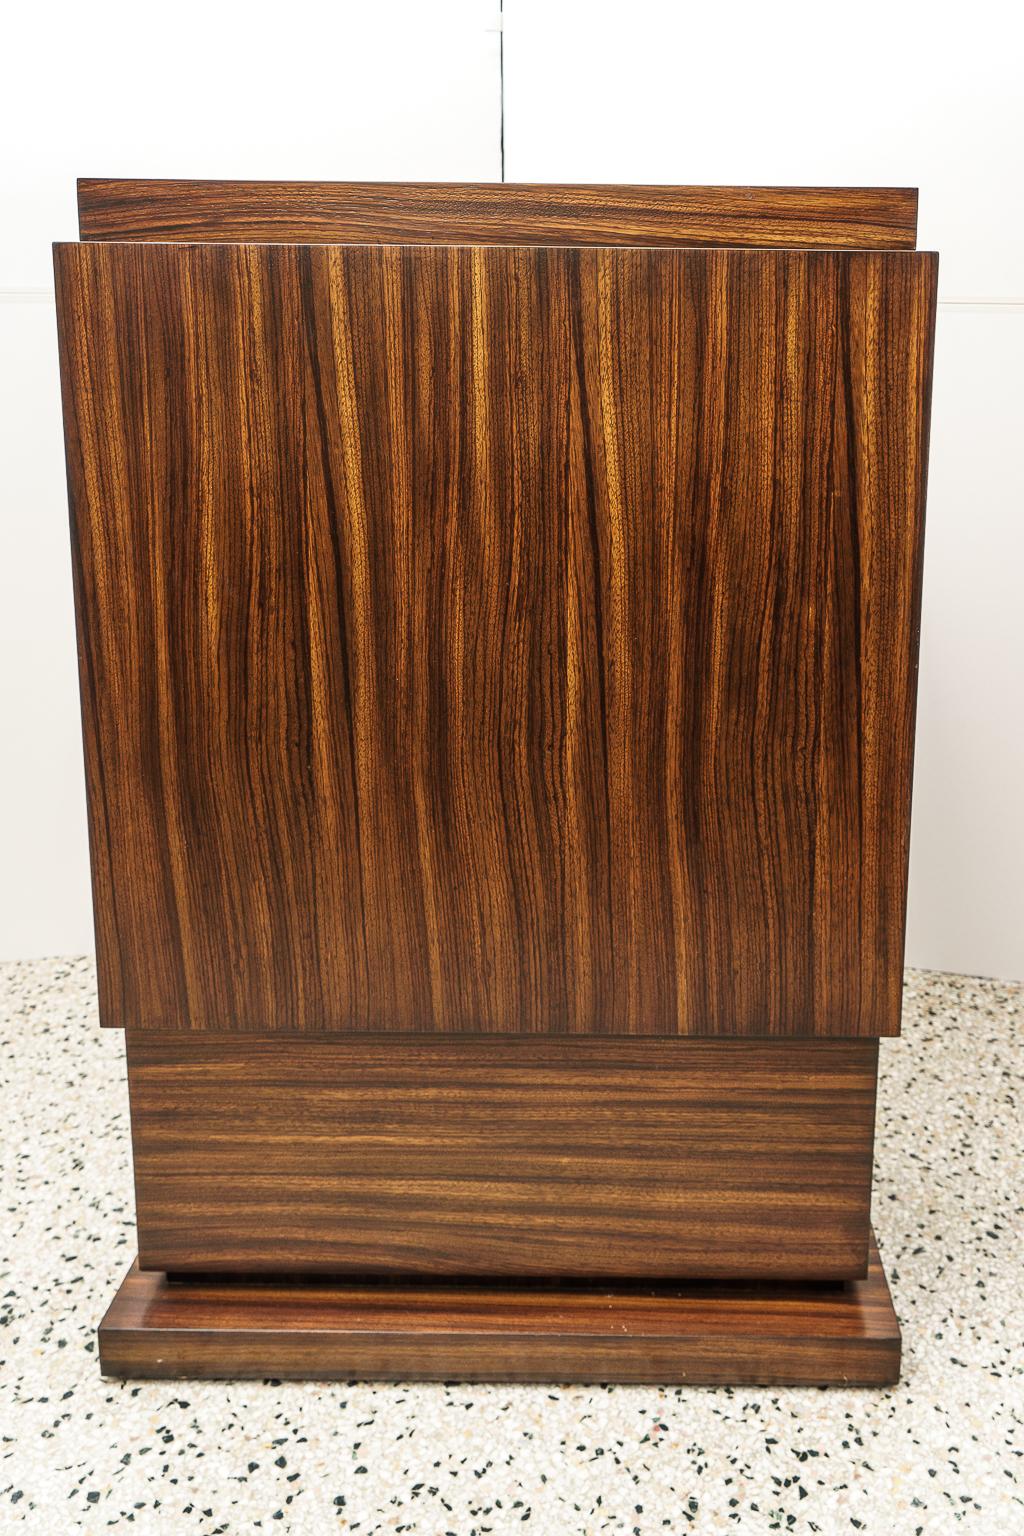 Art Deco style pedestal in Zebrano wood.
Acquired from a Palm Beach estate - 

Note the top surface measures 27 1/8 x 10 3/4 inches.
 